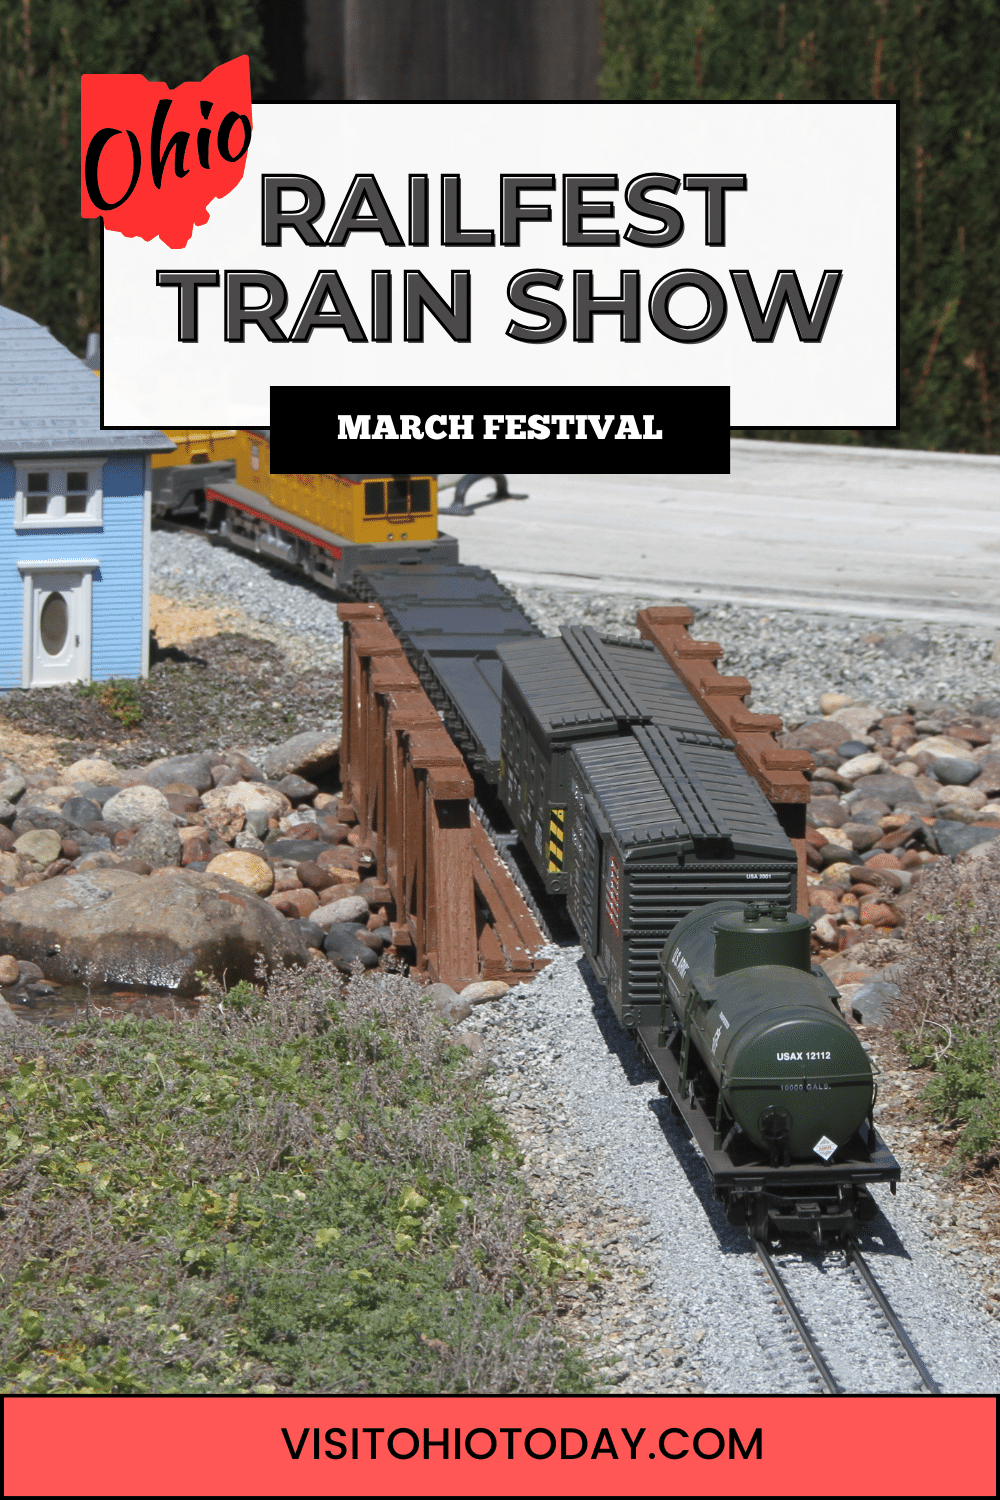 The Railfest Train Show is the largest continuous running two-day train show in Ohio that takes place in mid-March at Lakewood Community College in Kirtland.